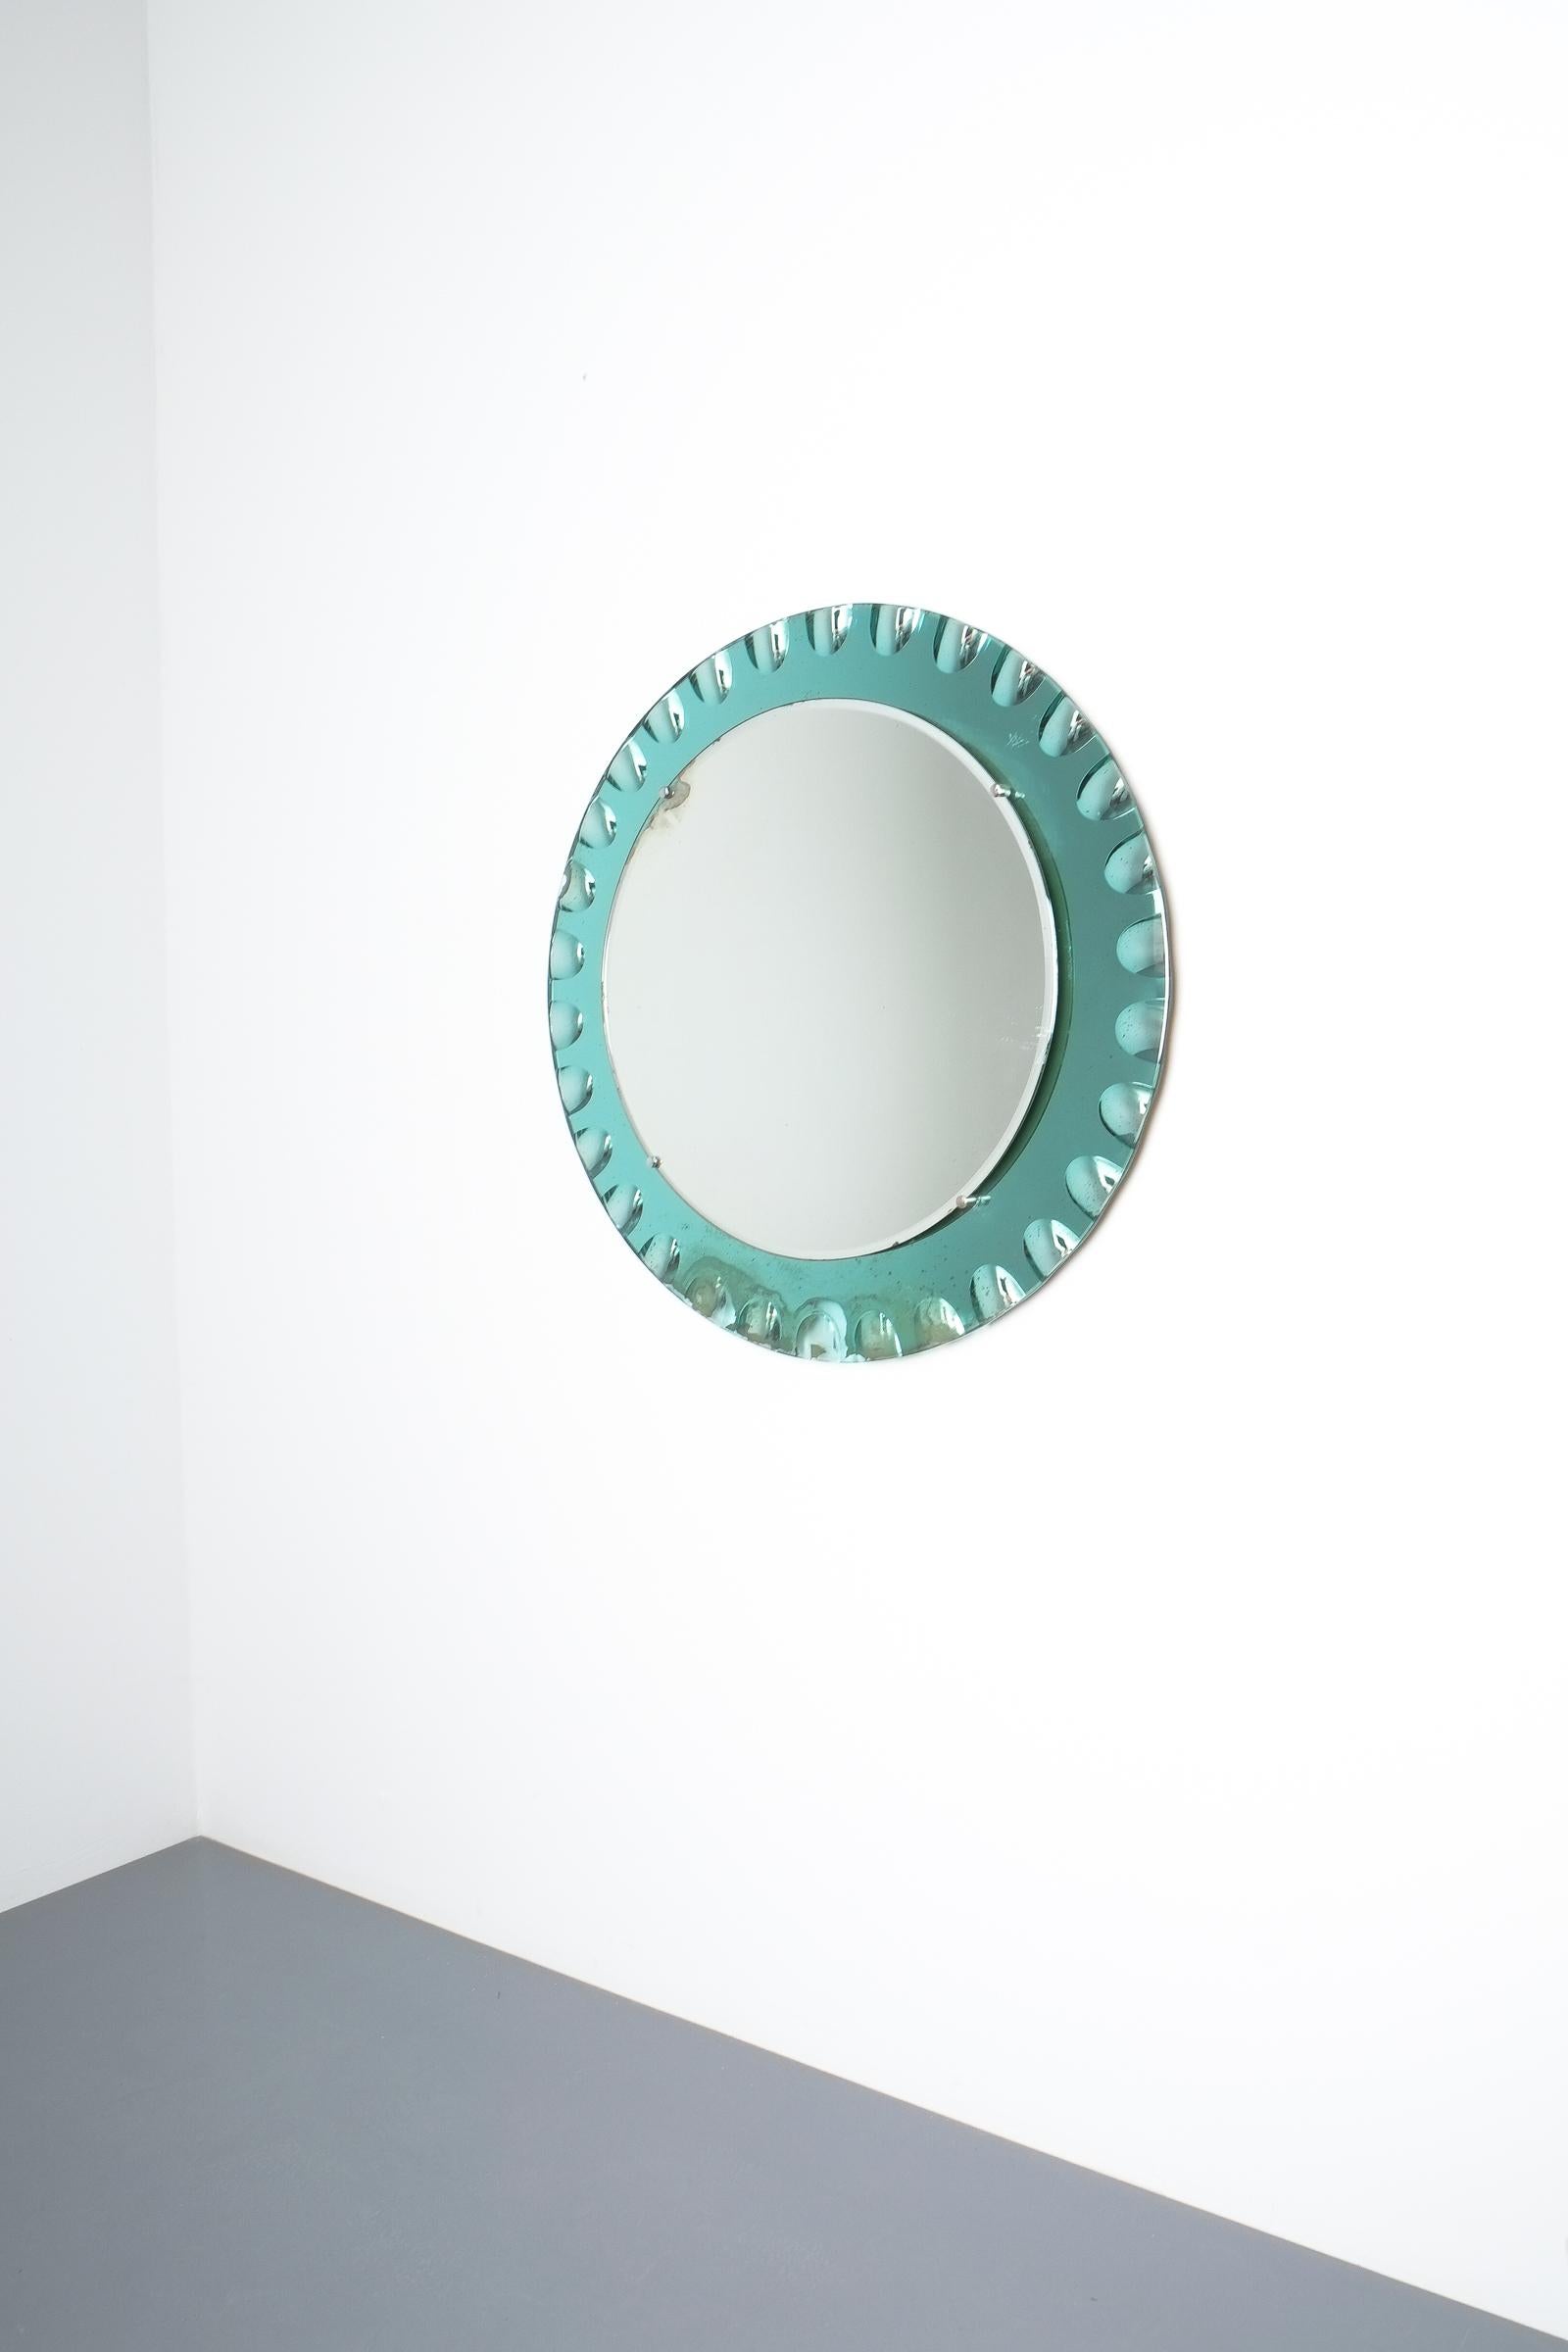 Mid-20th Century Wall Mirror by Cristal Art, Torino, circa 1960 Green Glass Midcentury For Sale